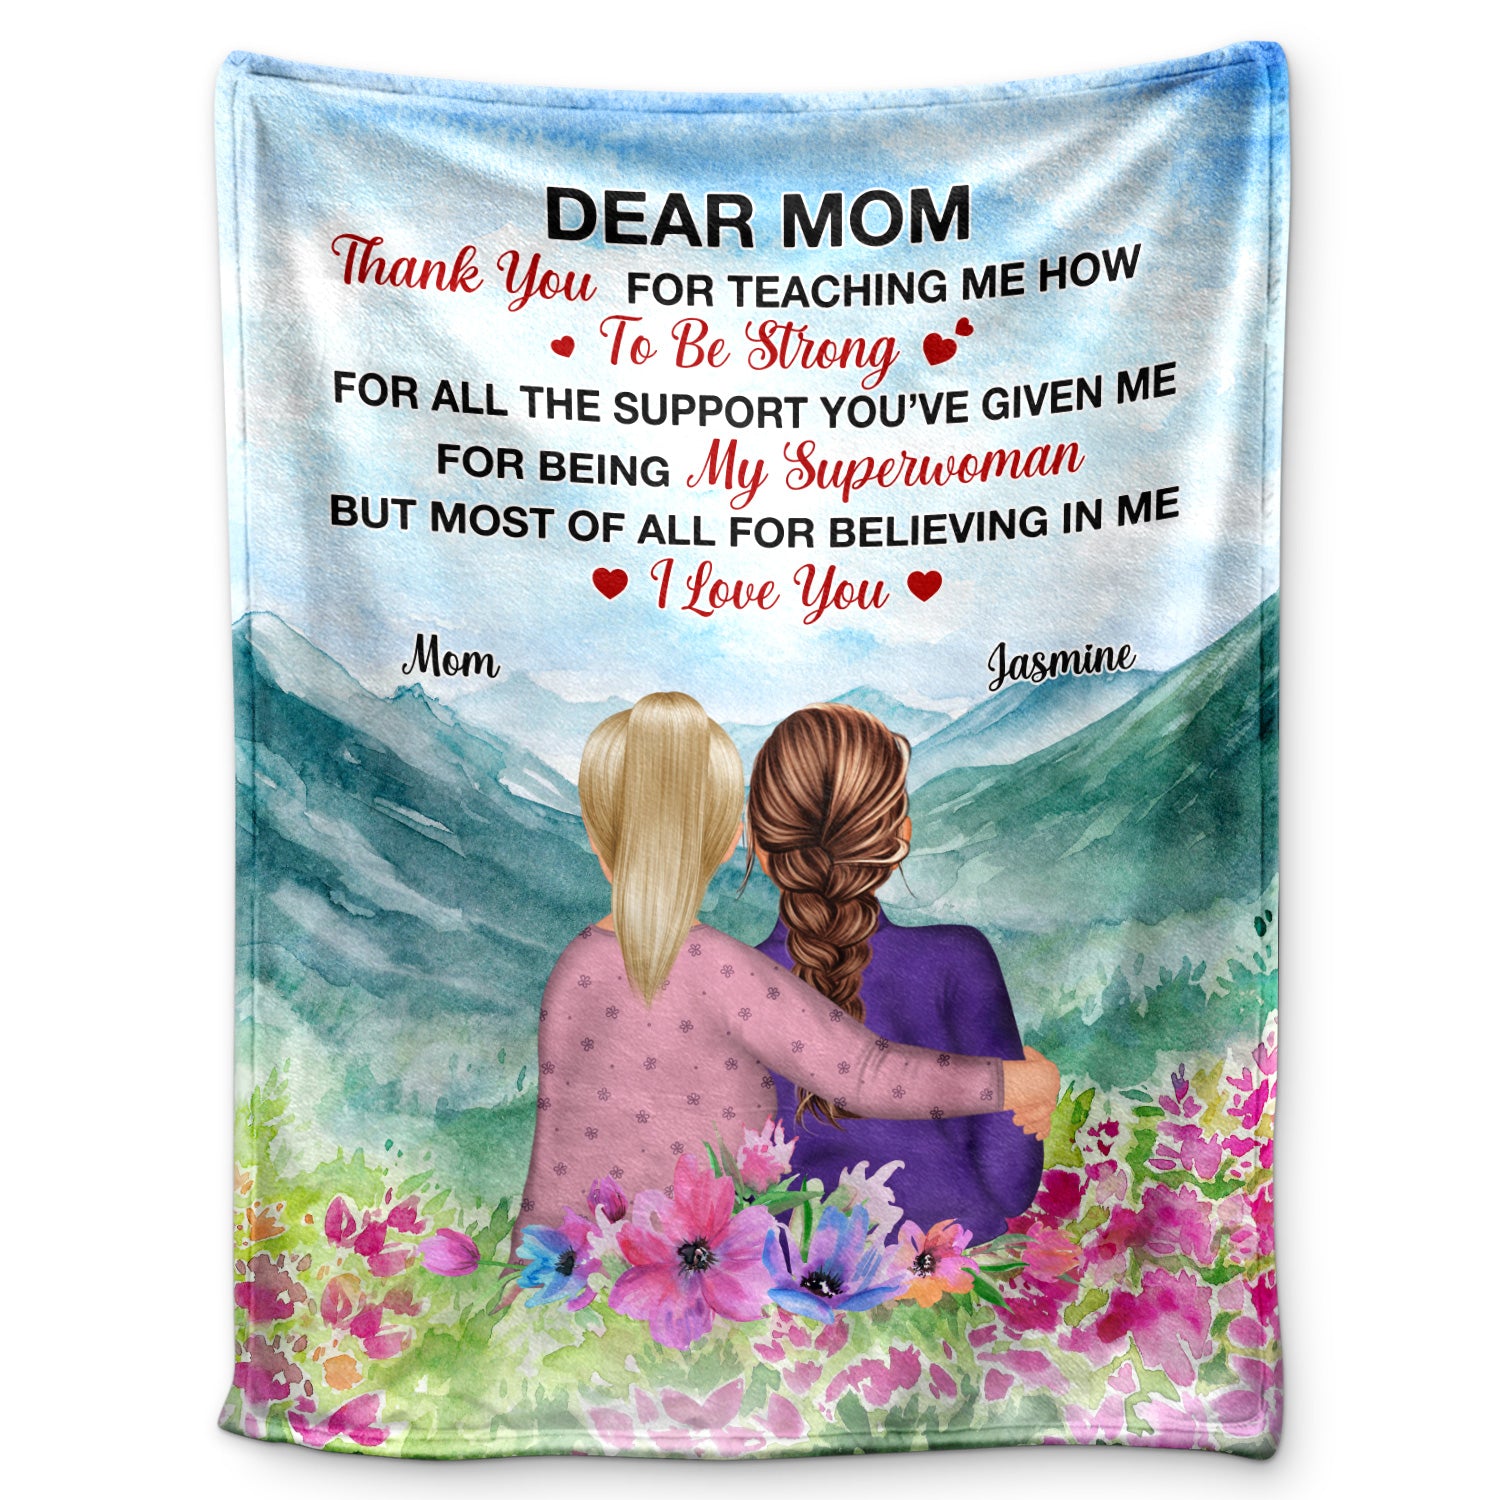 Dear Mom Thank You For Being My Superwoman - Birthday, Family Gift For Mother, Grandma, Daughter, Granddaughter - Personalized Custom Fleece Blanket